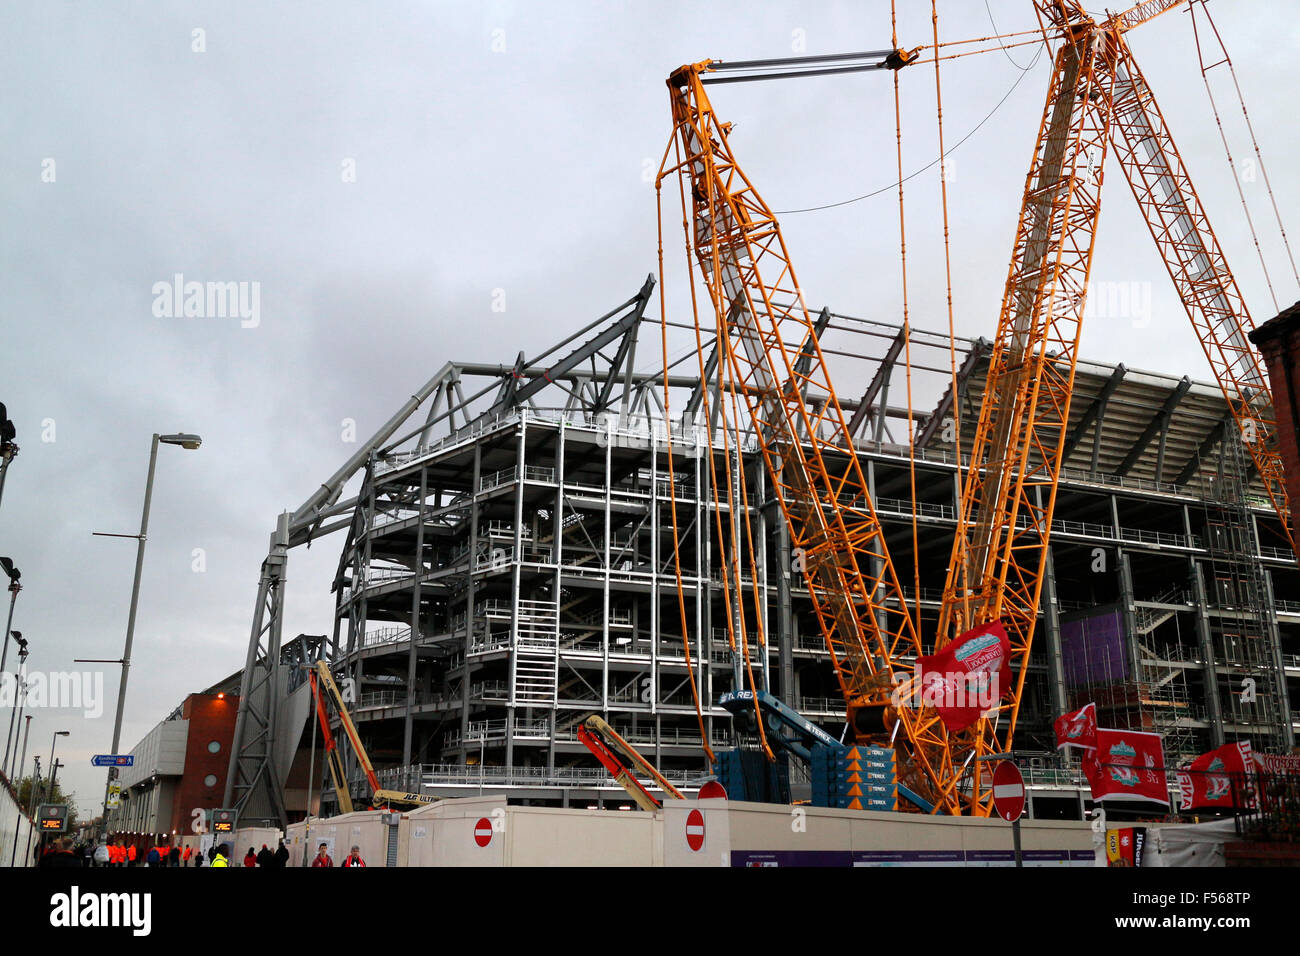 Liverpool FC anfield stadium main stand expansion ongoing England UK Stock Photo